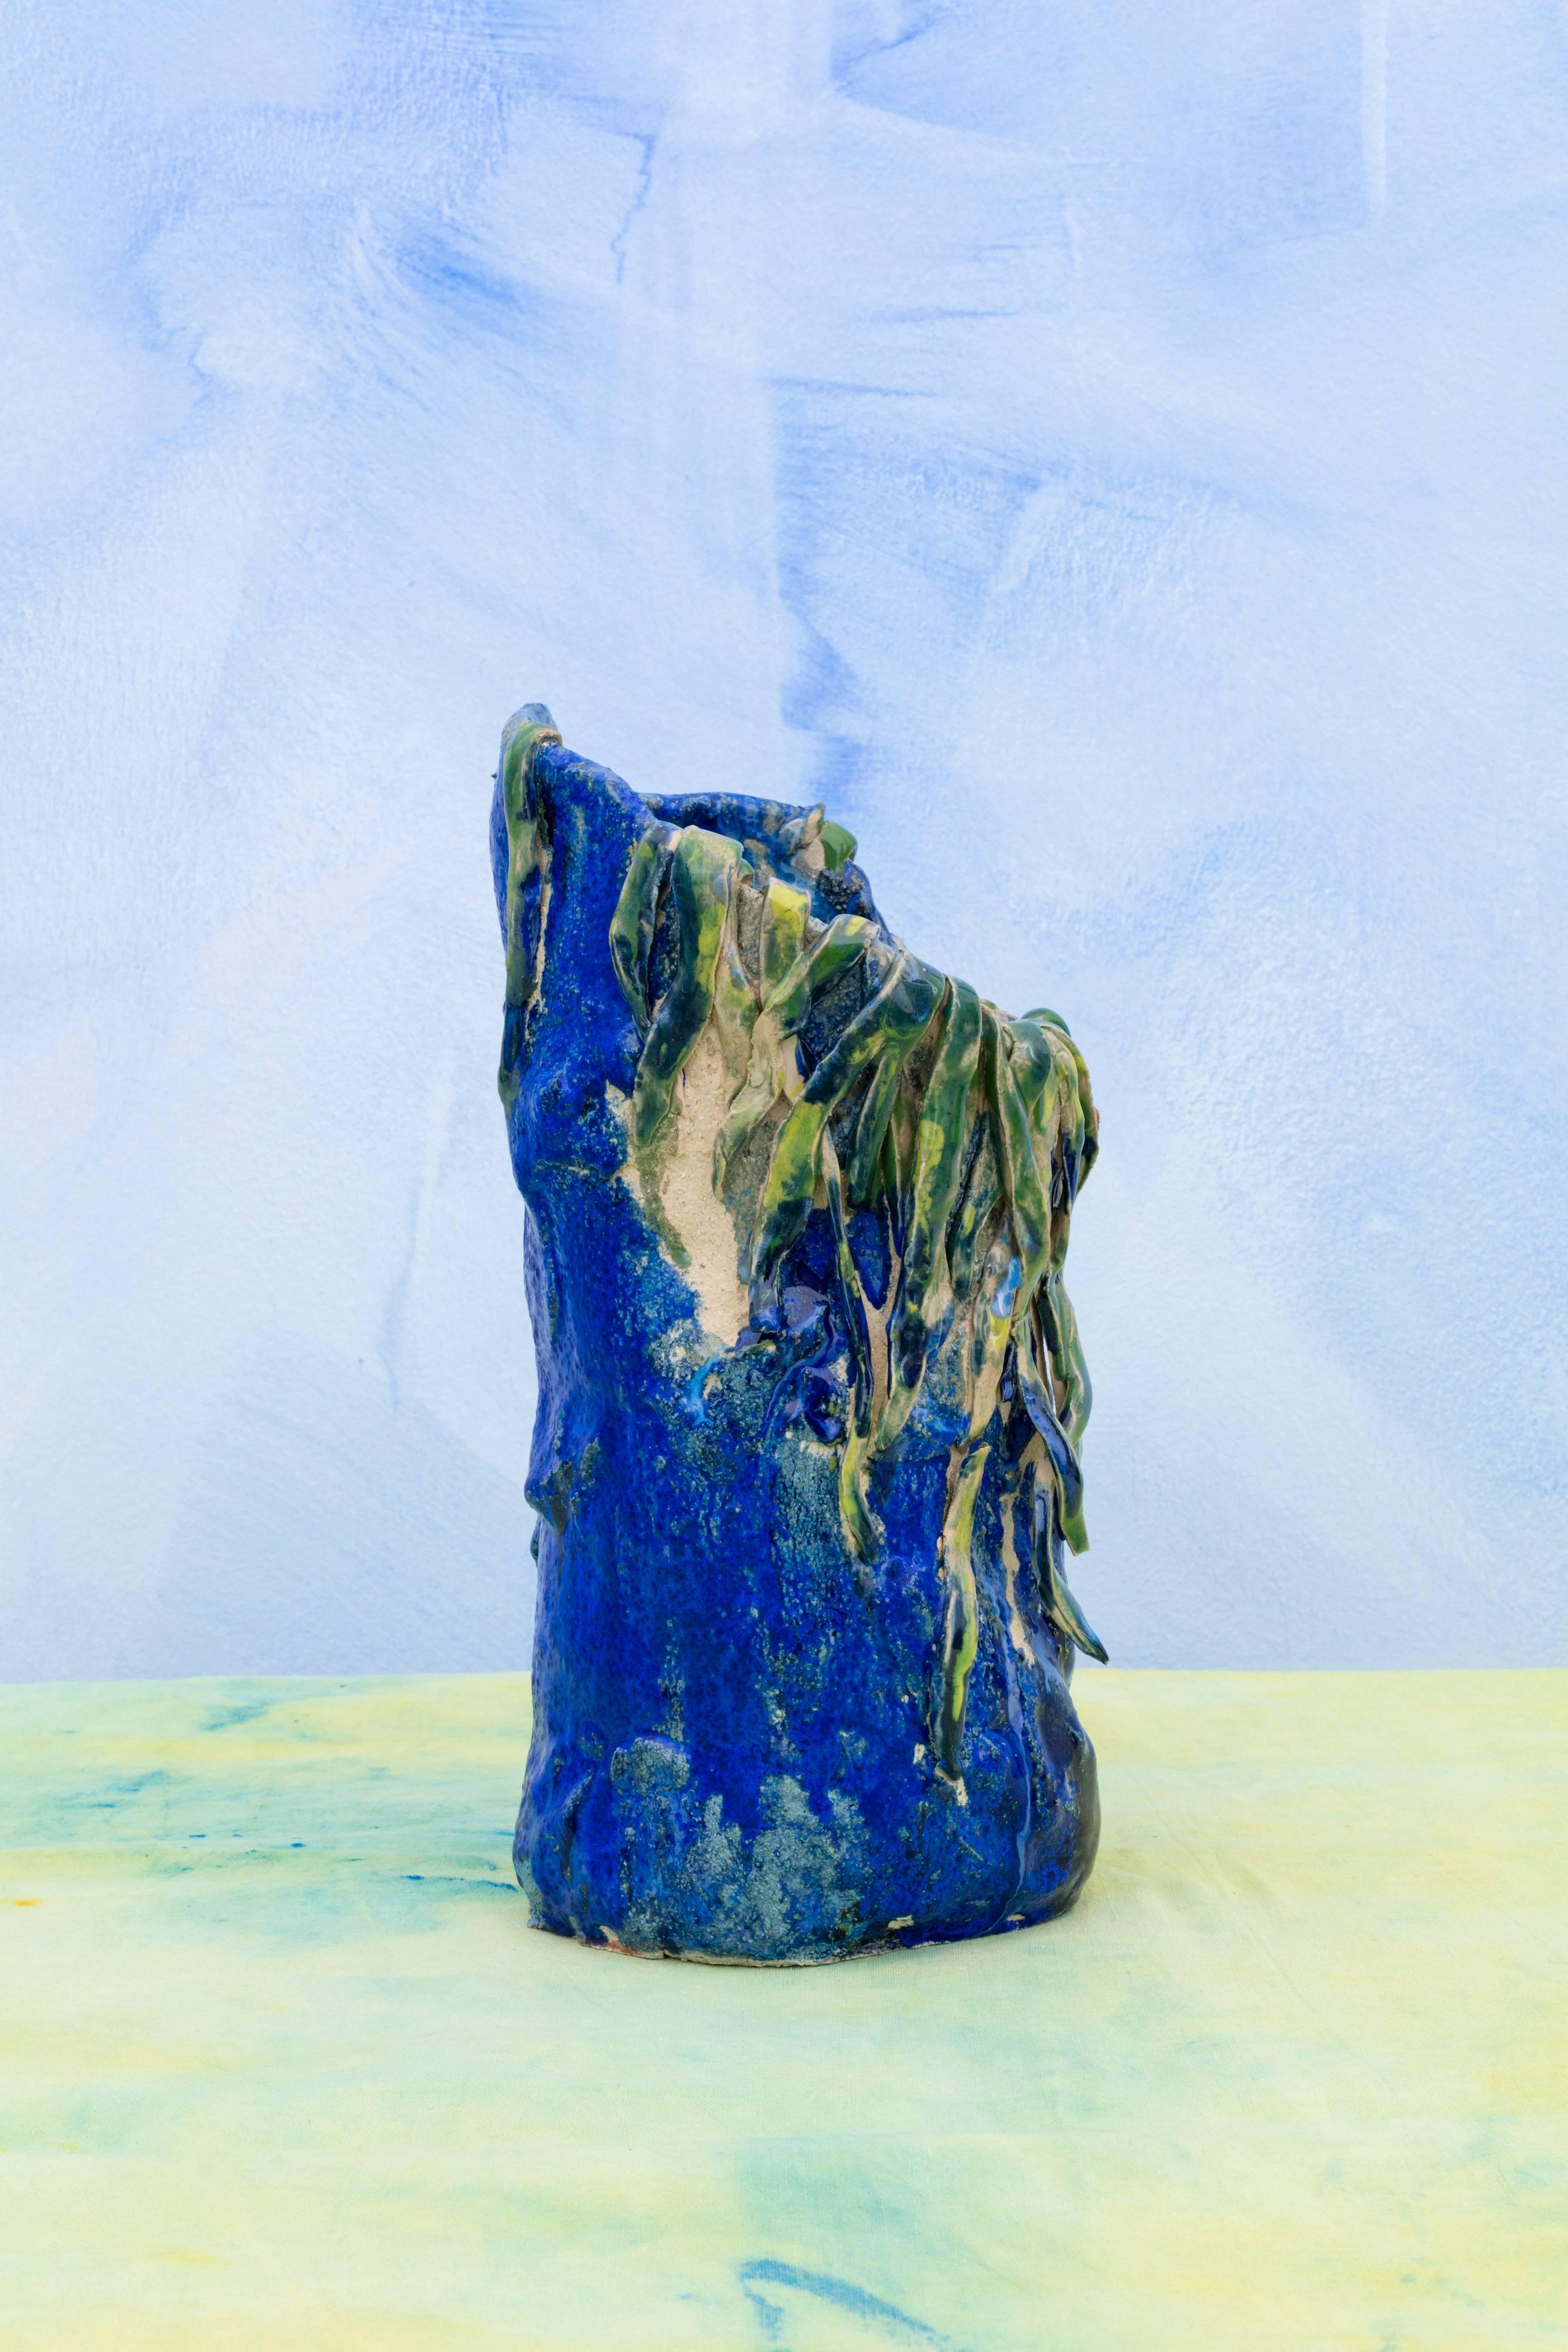 Modern Contemporary Handmade Blue and Green Ceramic Vase by Superpoly